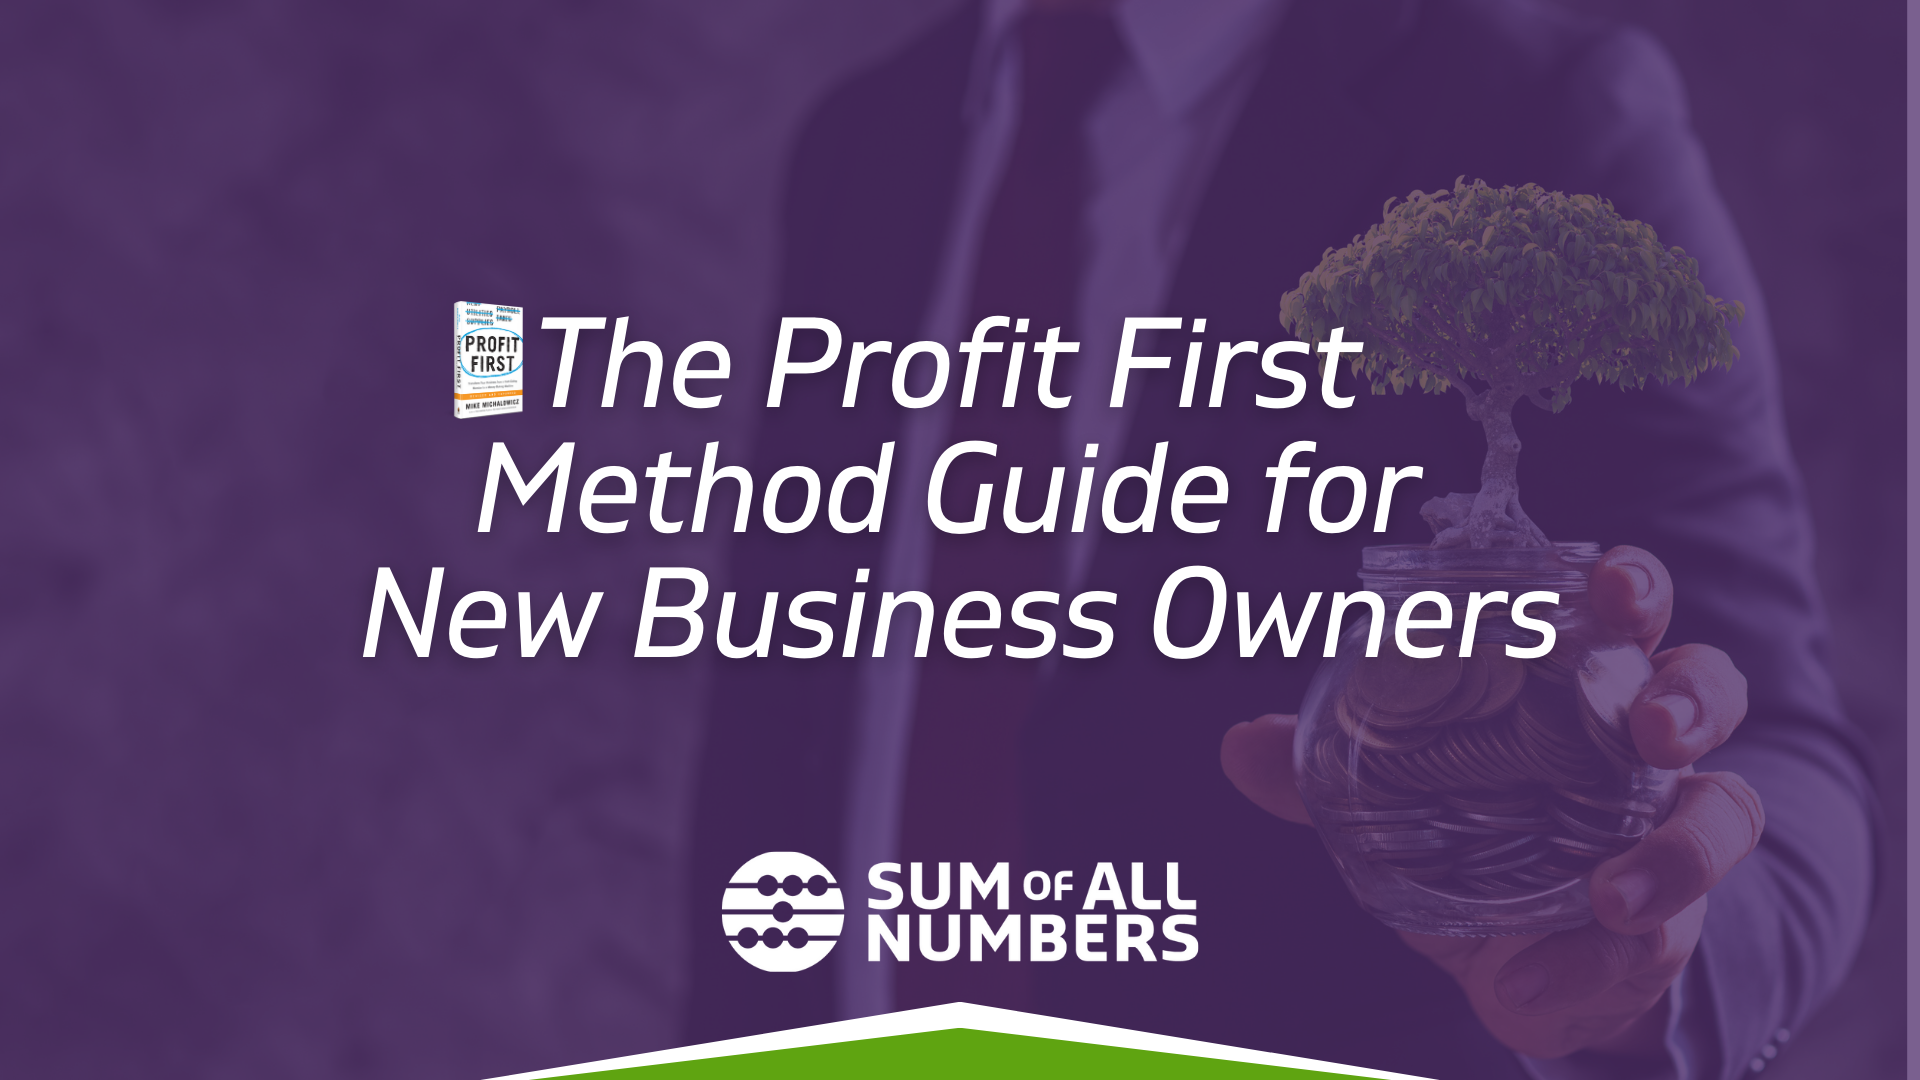 The Profit First Method Guide for New Business Owners